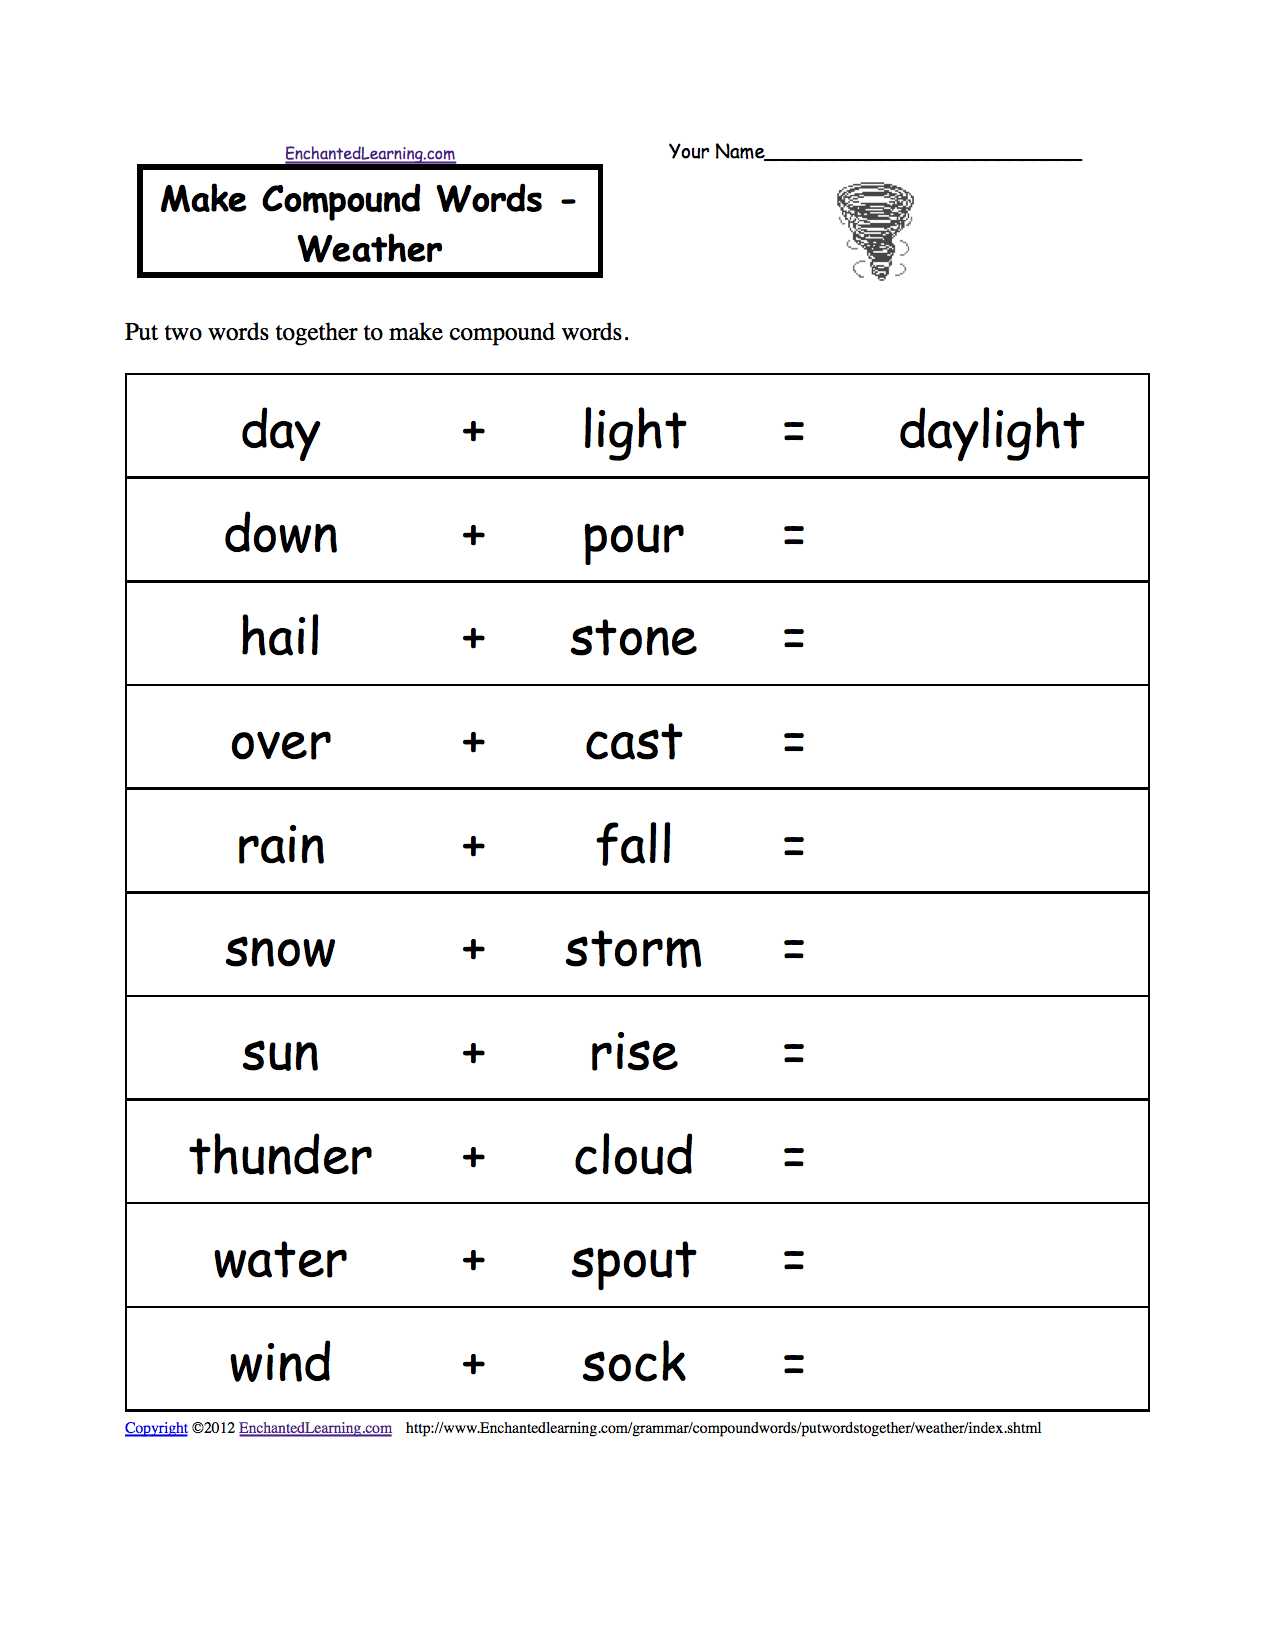 Science tools Worksheet Also Second Grade Weather Worksheets 2nd Grade Science Weather Worksheets